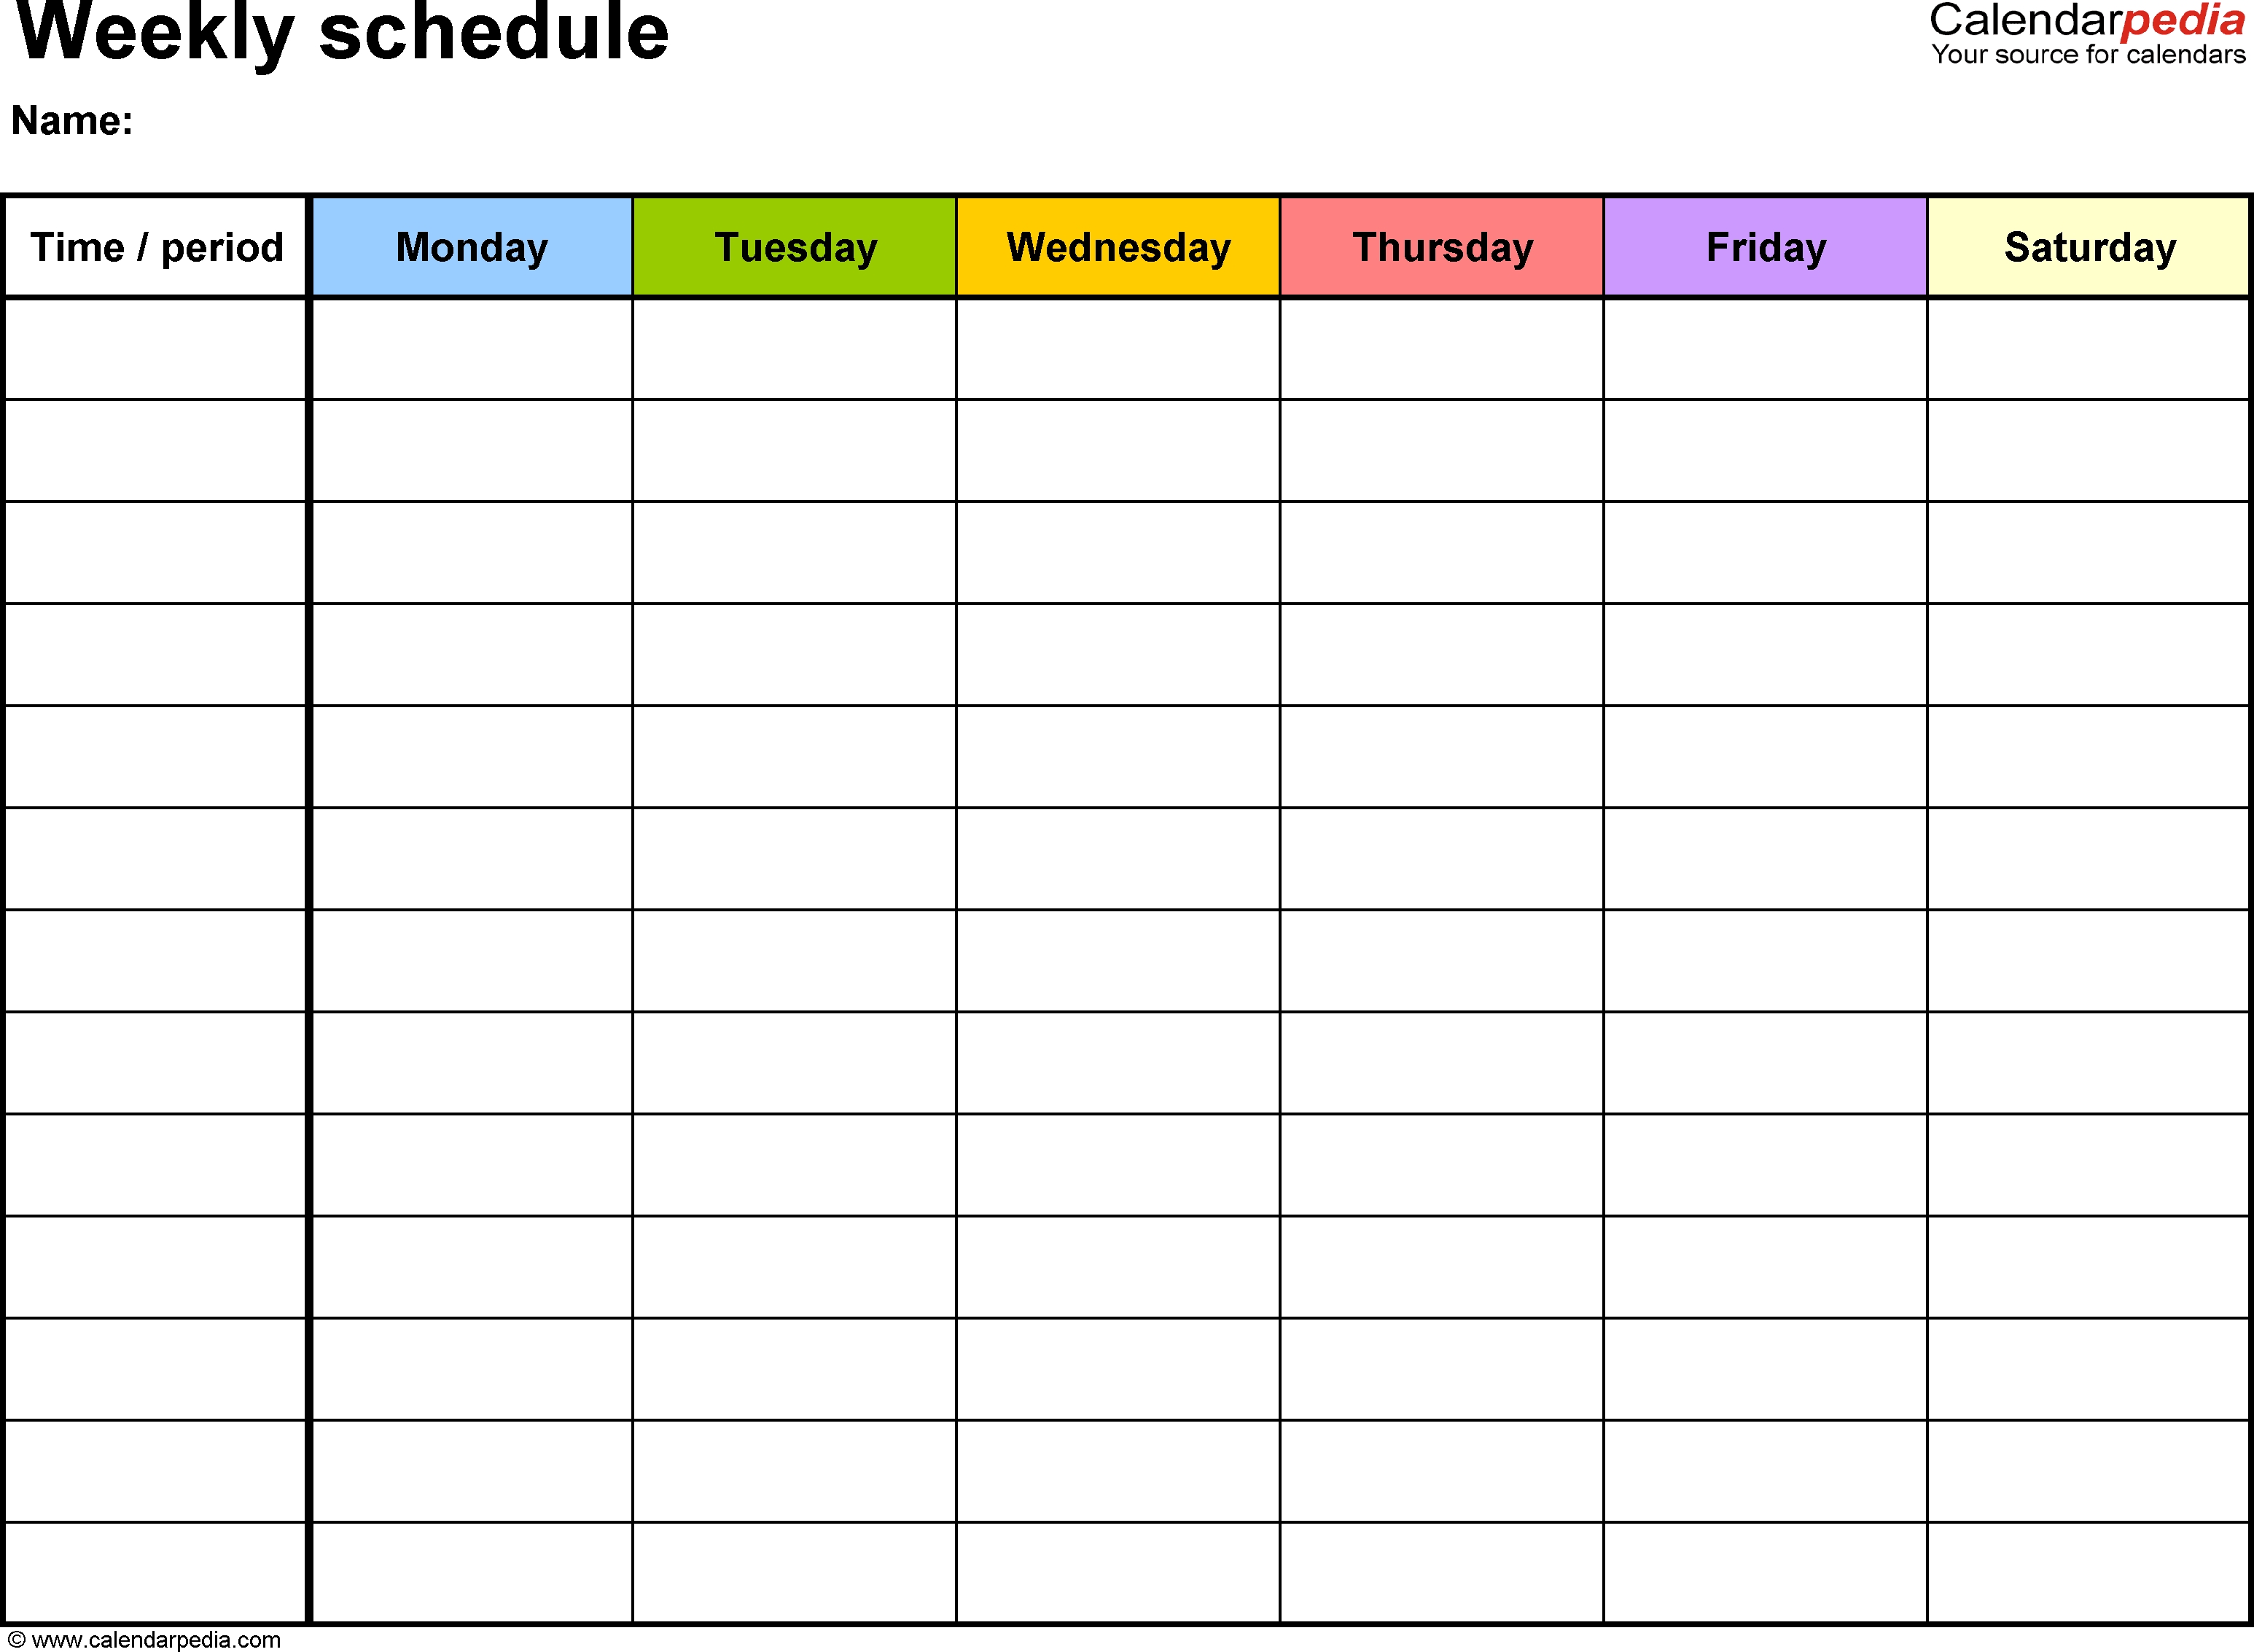 Free Weekly Schedule Templates For Word - 18 Templates Monday Through Friday Blank Calendar